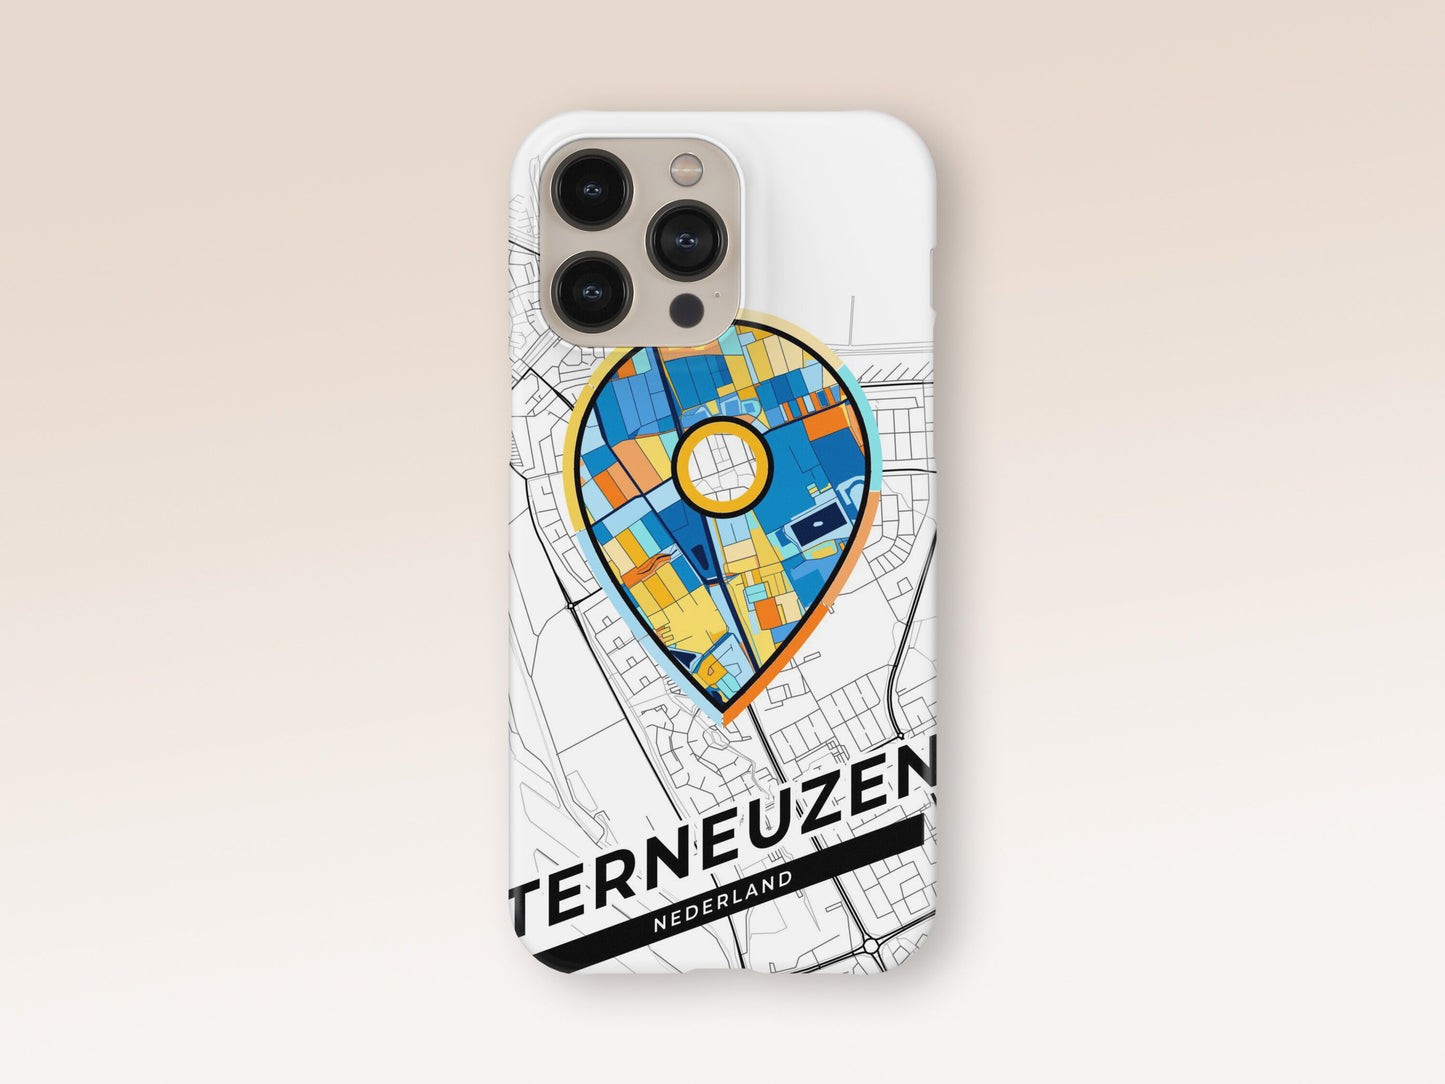 Terneuzen Netherlands slim phone case with colorful icon 1